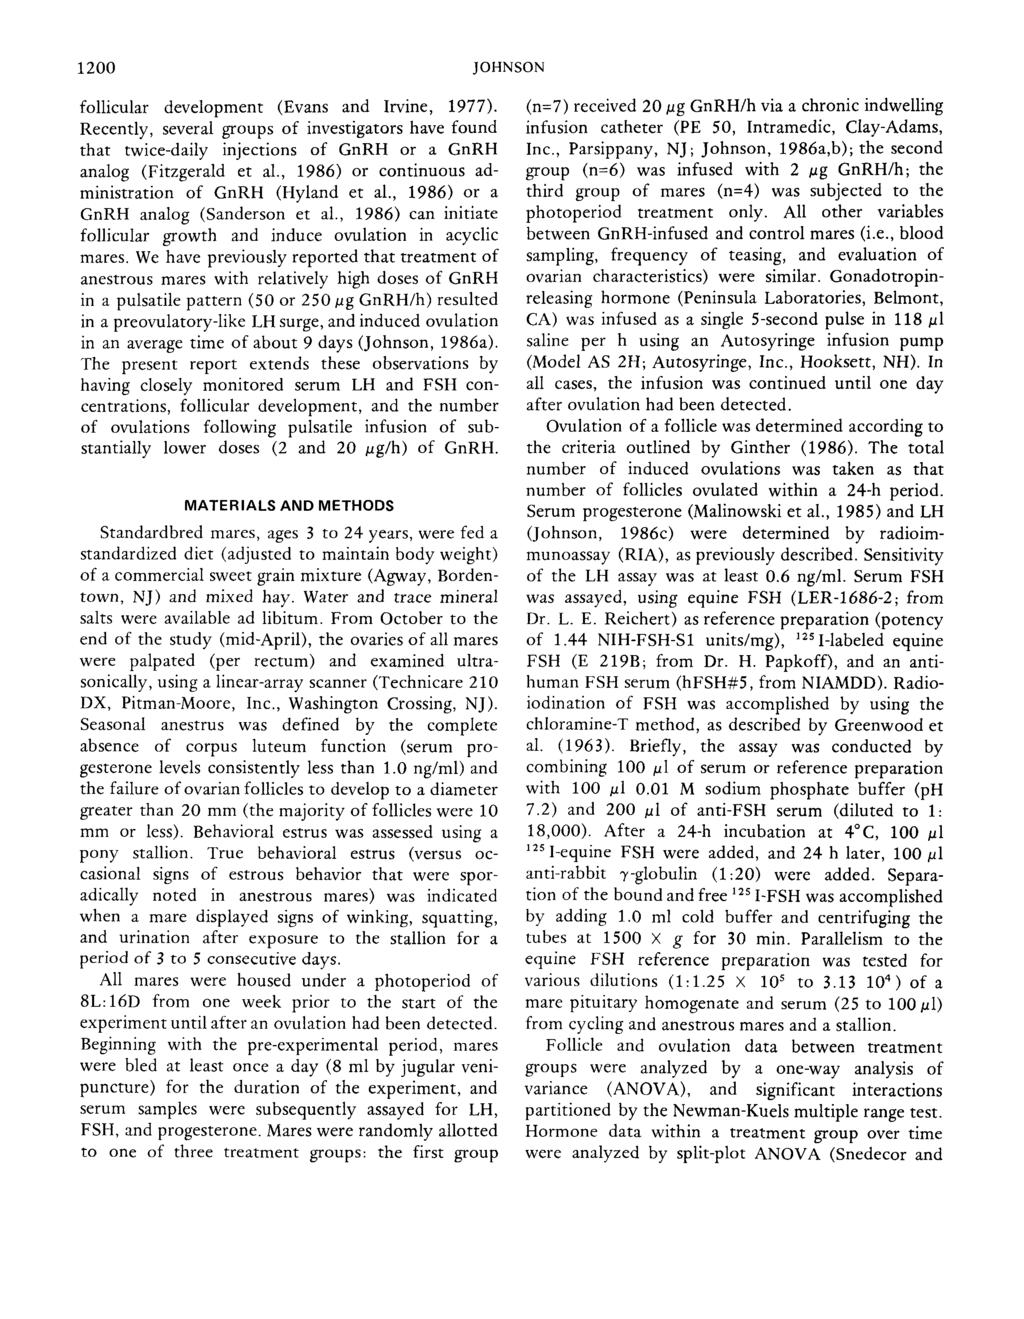 1200 JOHNSON follicular development (Evans and Irvine, 1977). Recently, several groups of investigators have found that twice-daily injections of GnRH or a GnRH analog (Fitzgerald et al.